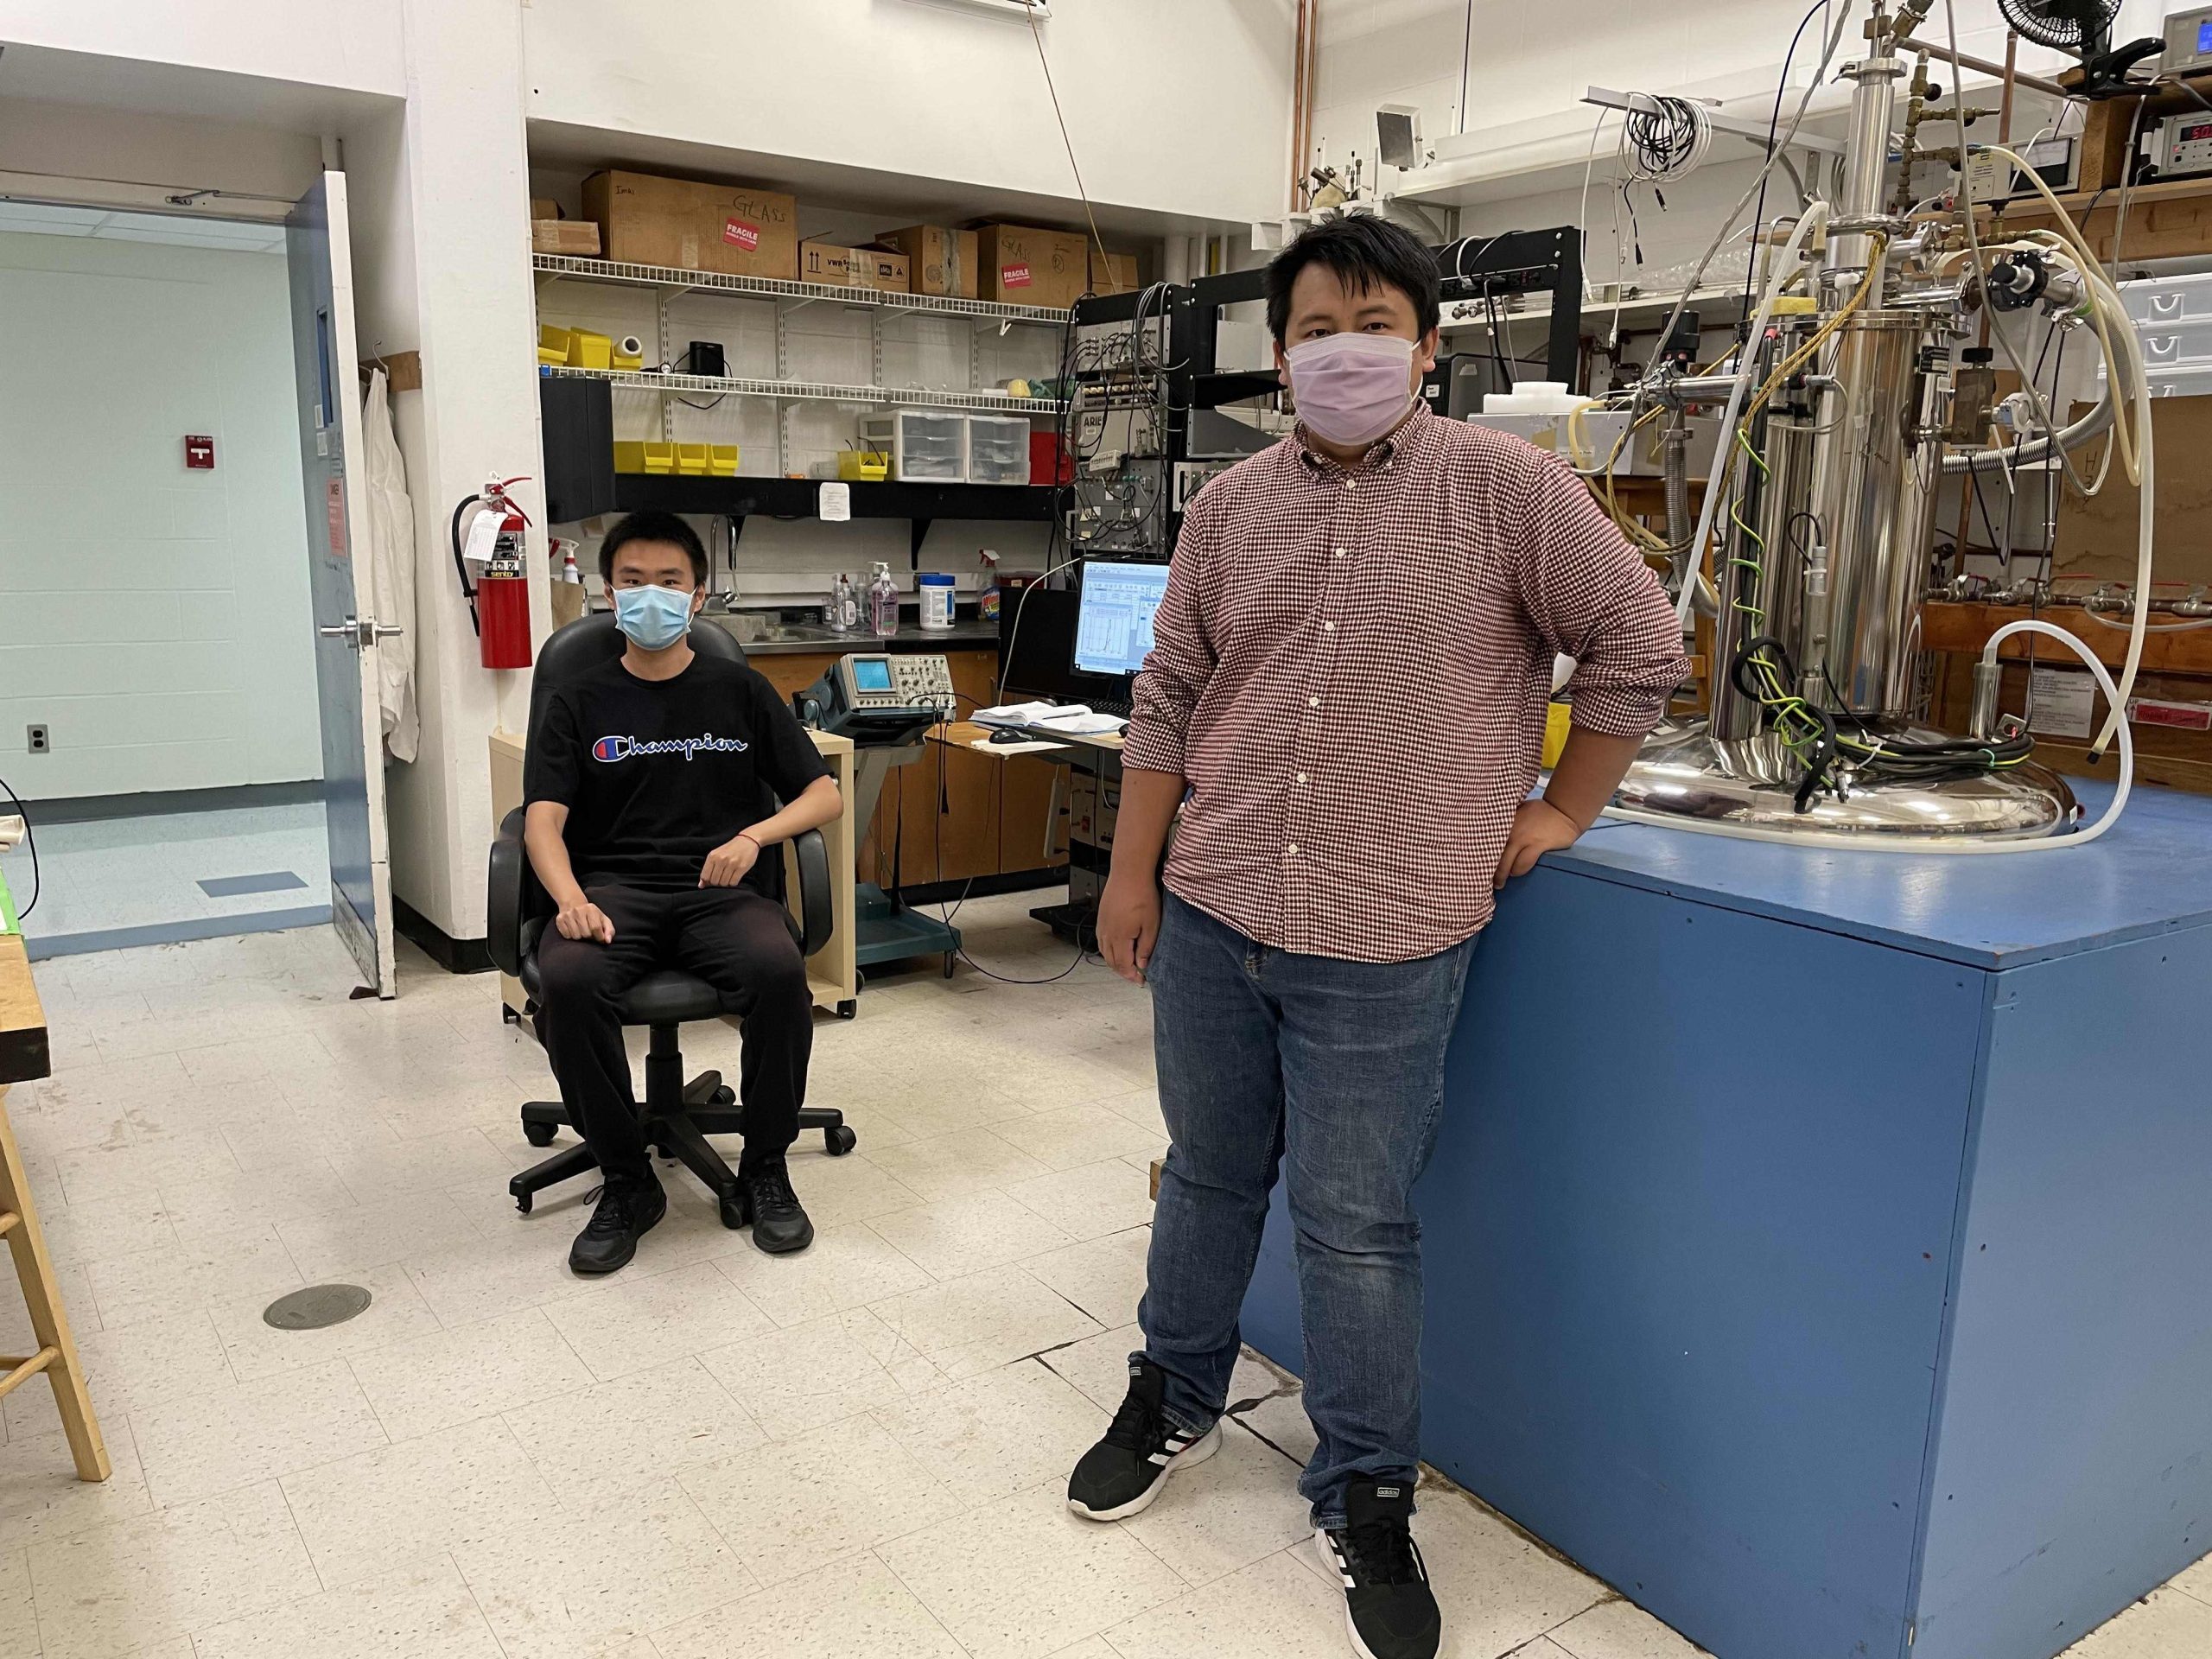 Ph.D. students Jerry Wang and Weishi Yuan in a lab